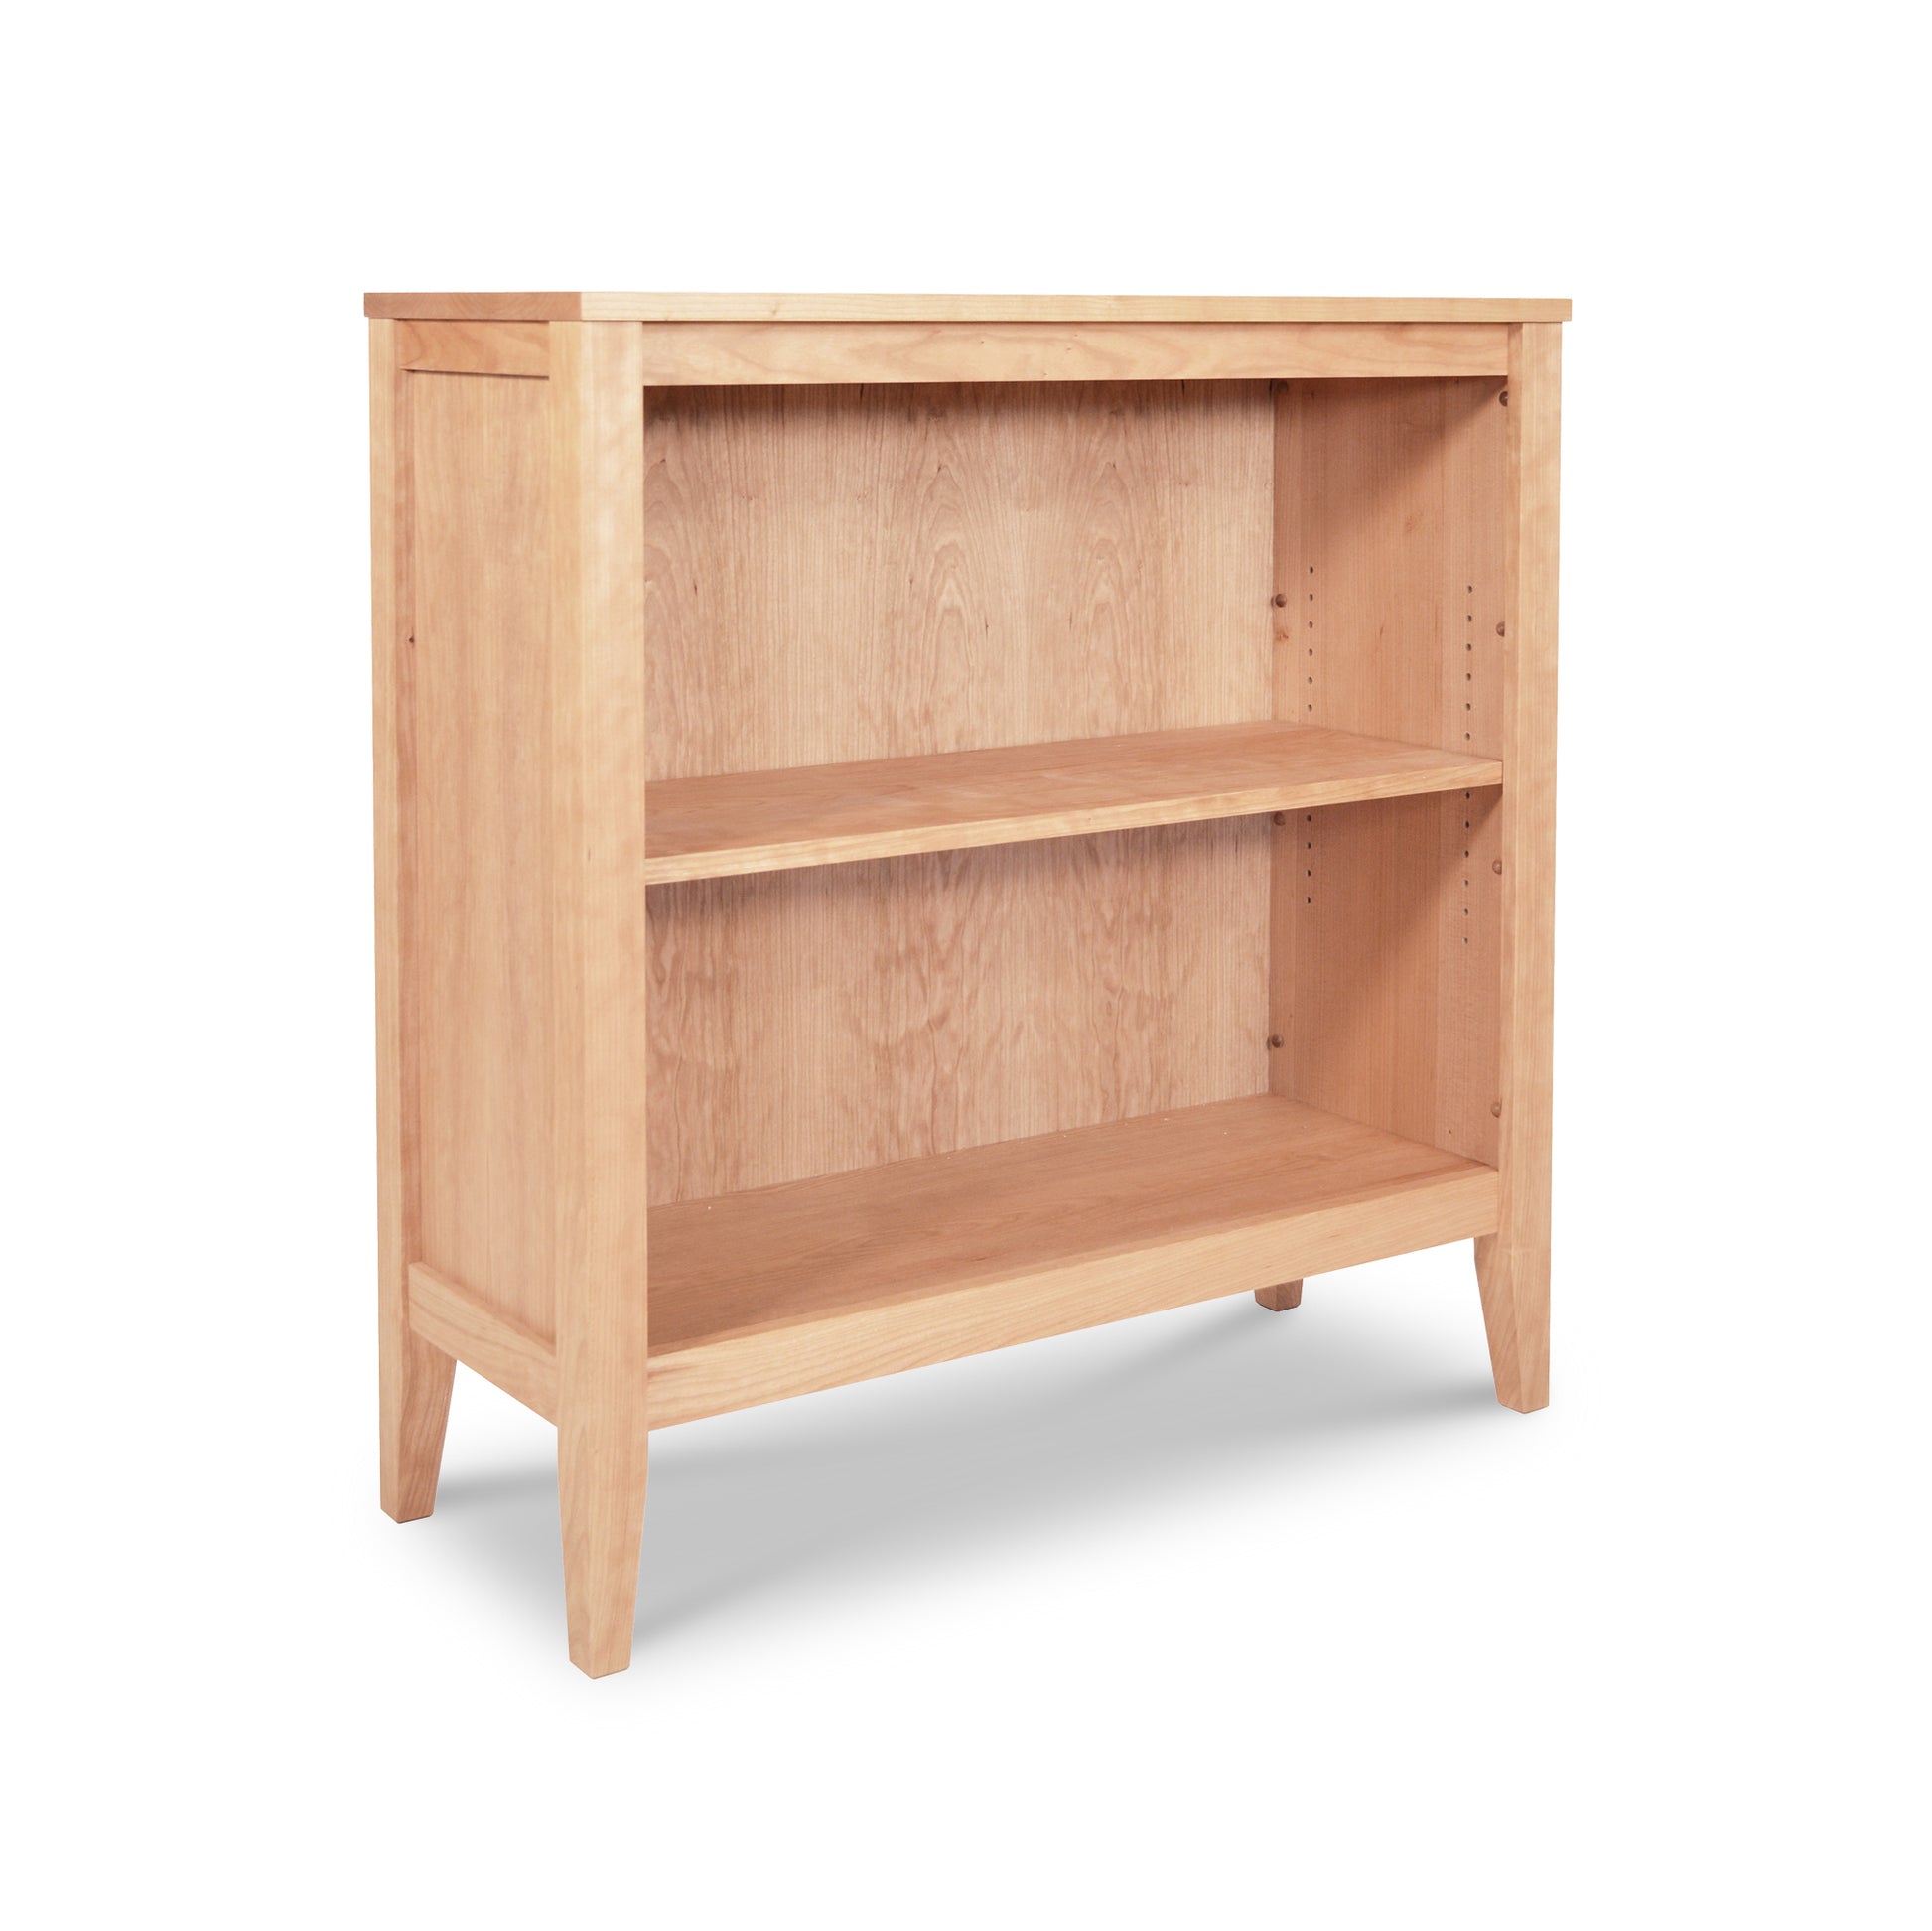 The Maple Corner Woodworks Andover Modern Bookcase, handcrafted in Vermont by skilled furniture craftsmen, combines traditional and modern design. It features a wooden construction and stands elegantly on a white background.